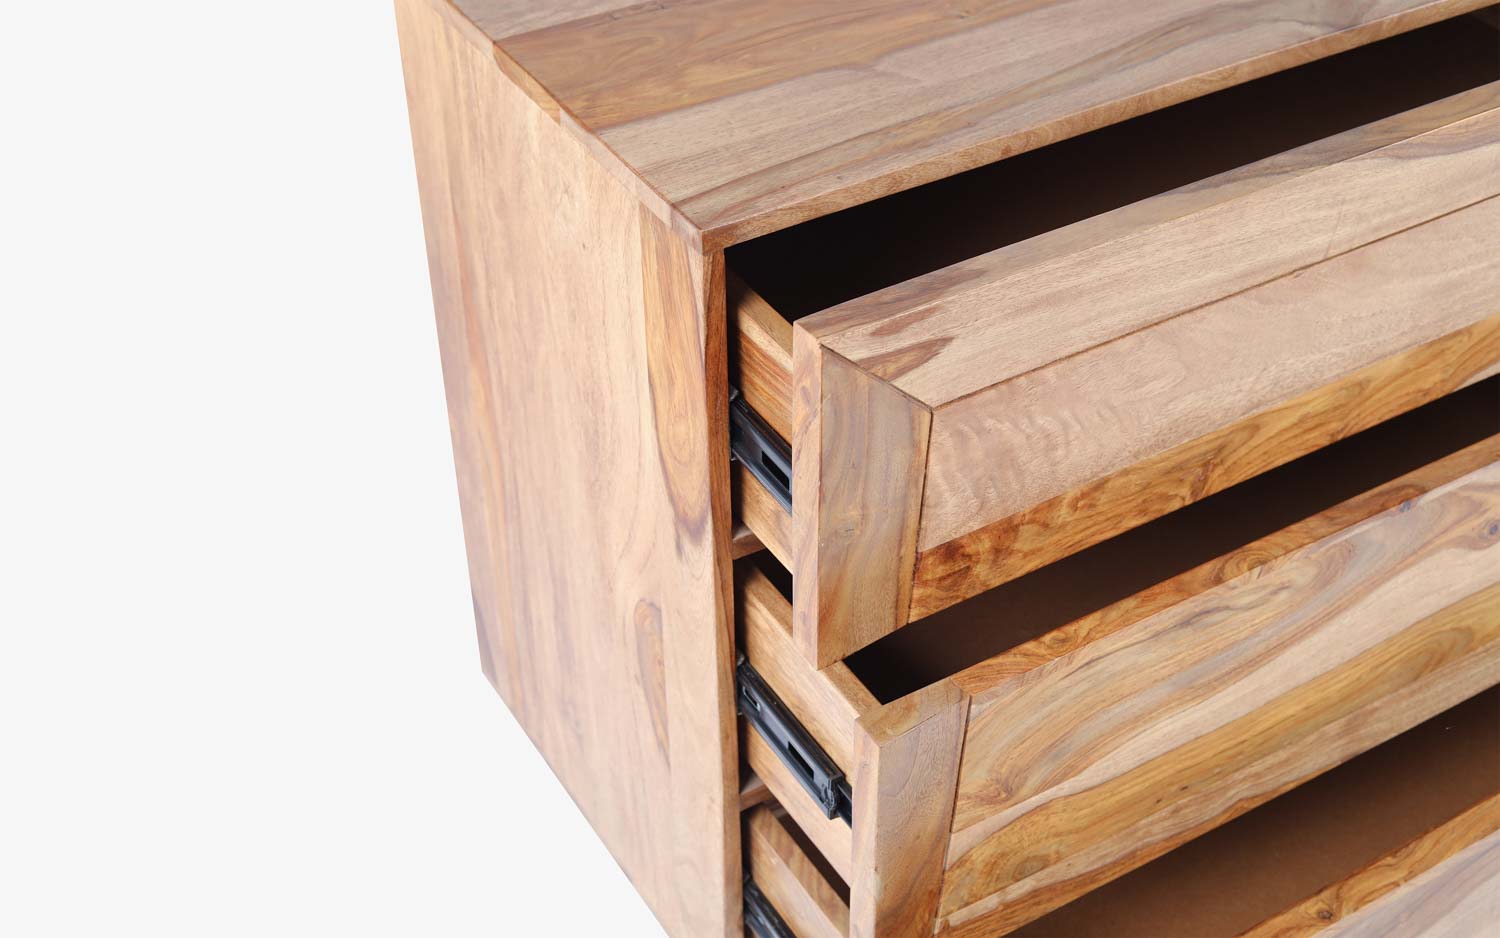 Metric Chest of Drawer made of wood with morden design